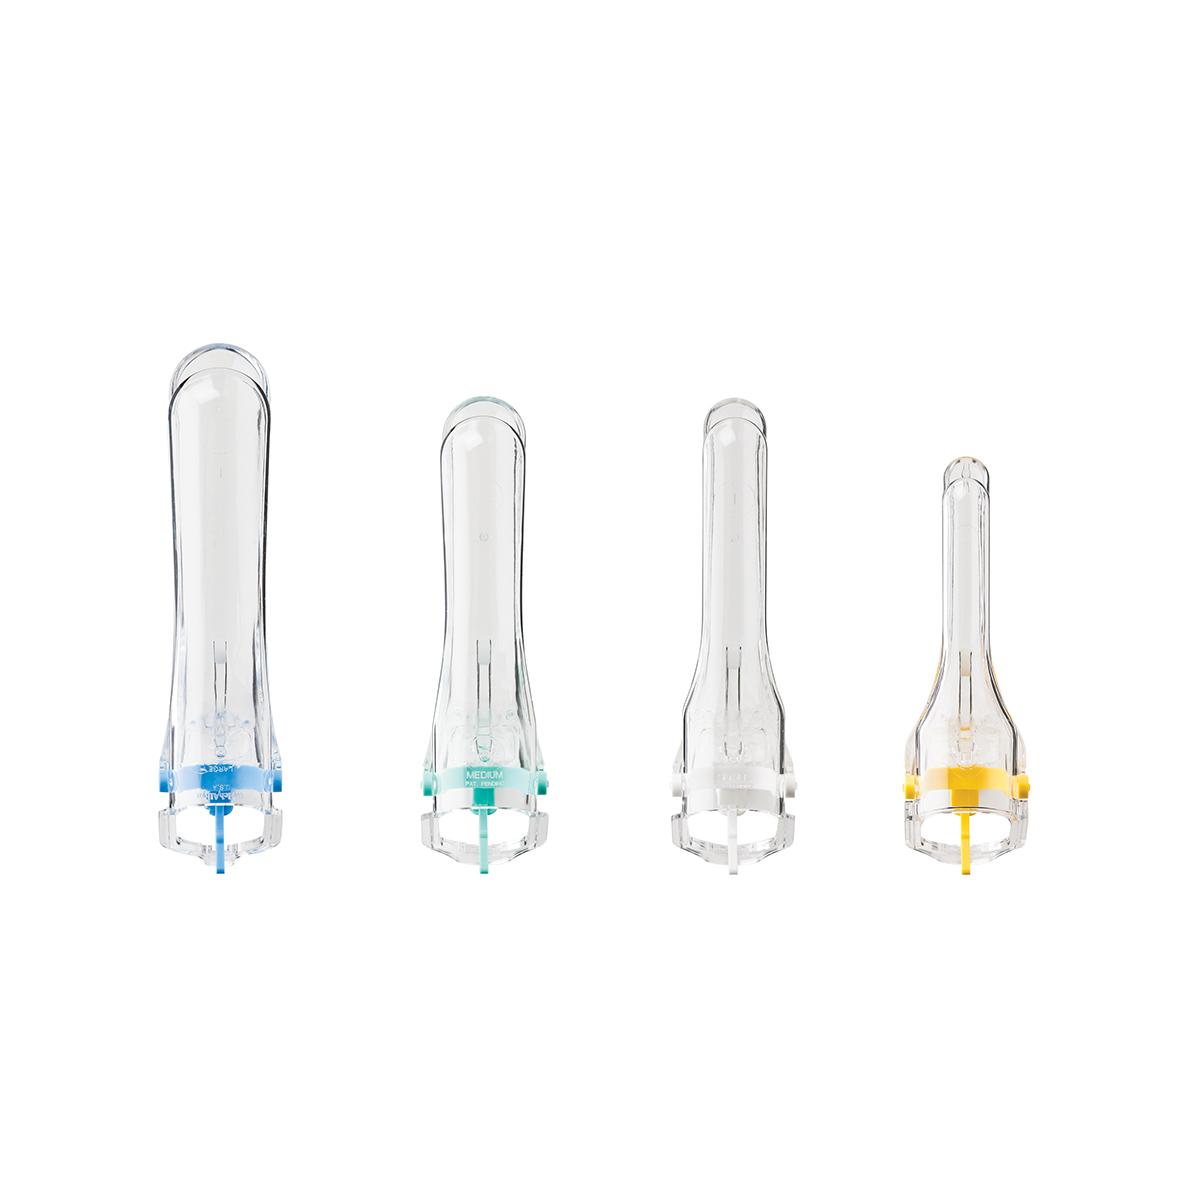 KleenSpec Disposable Vaginal Specula, group of four, top view